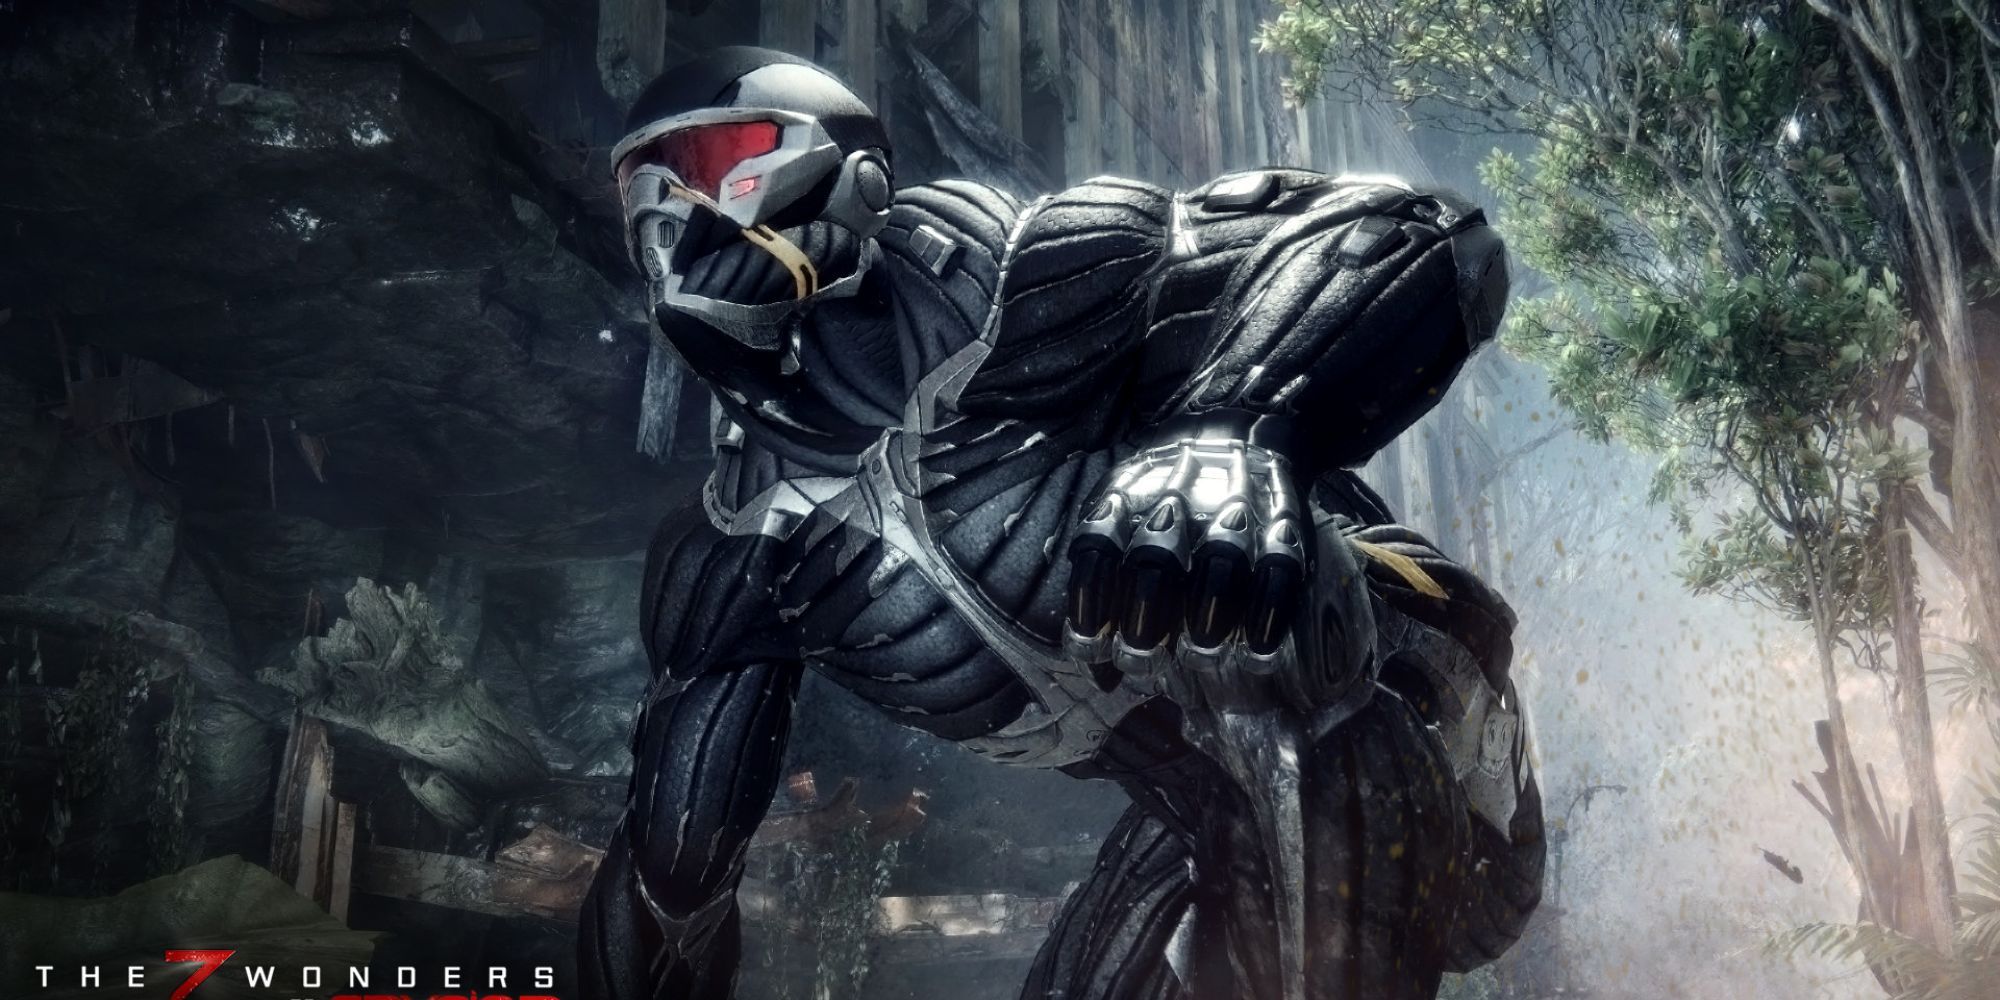 crysis 3 cover